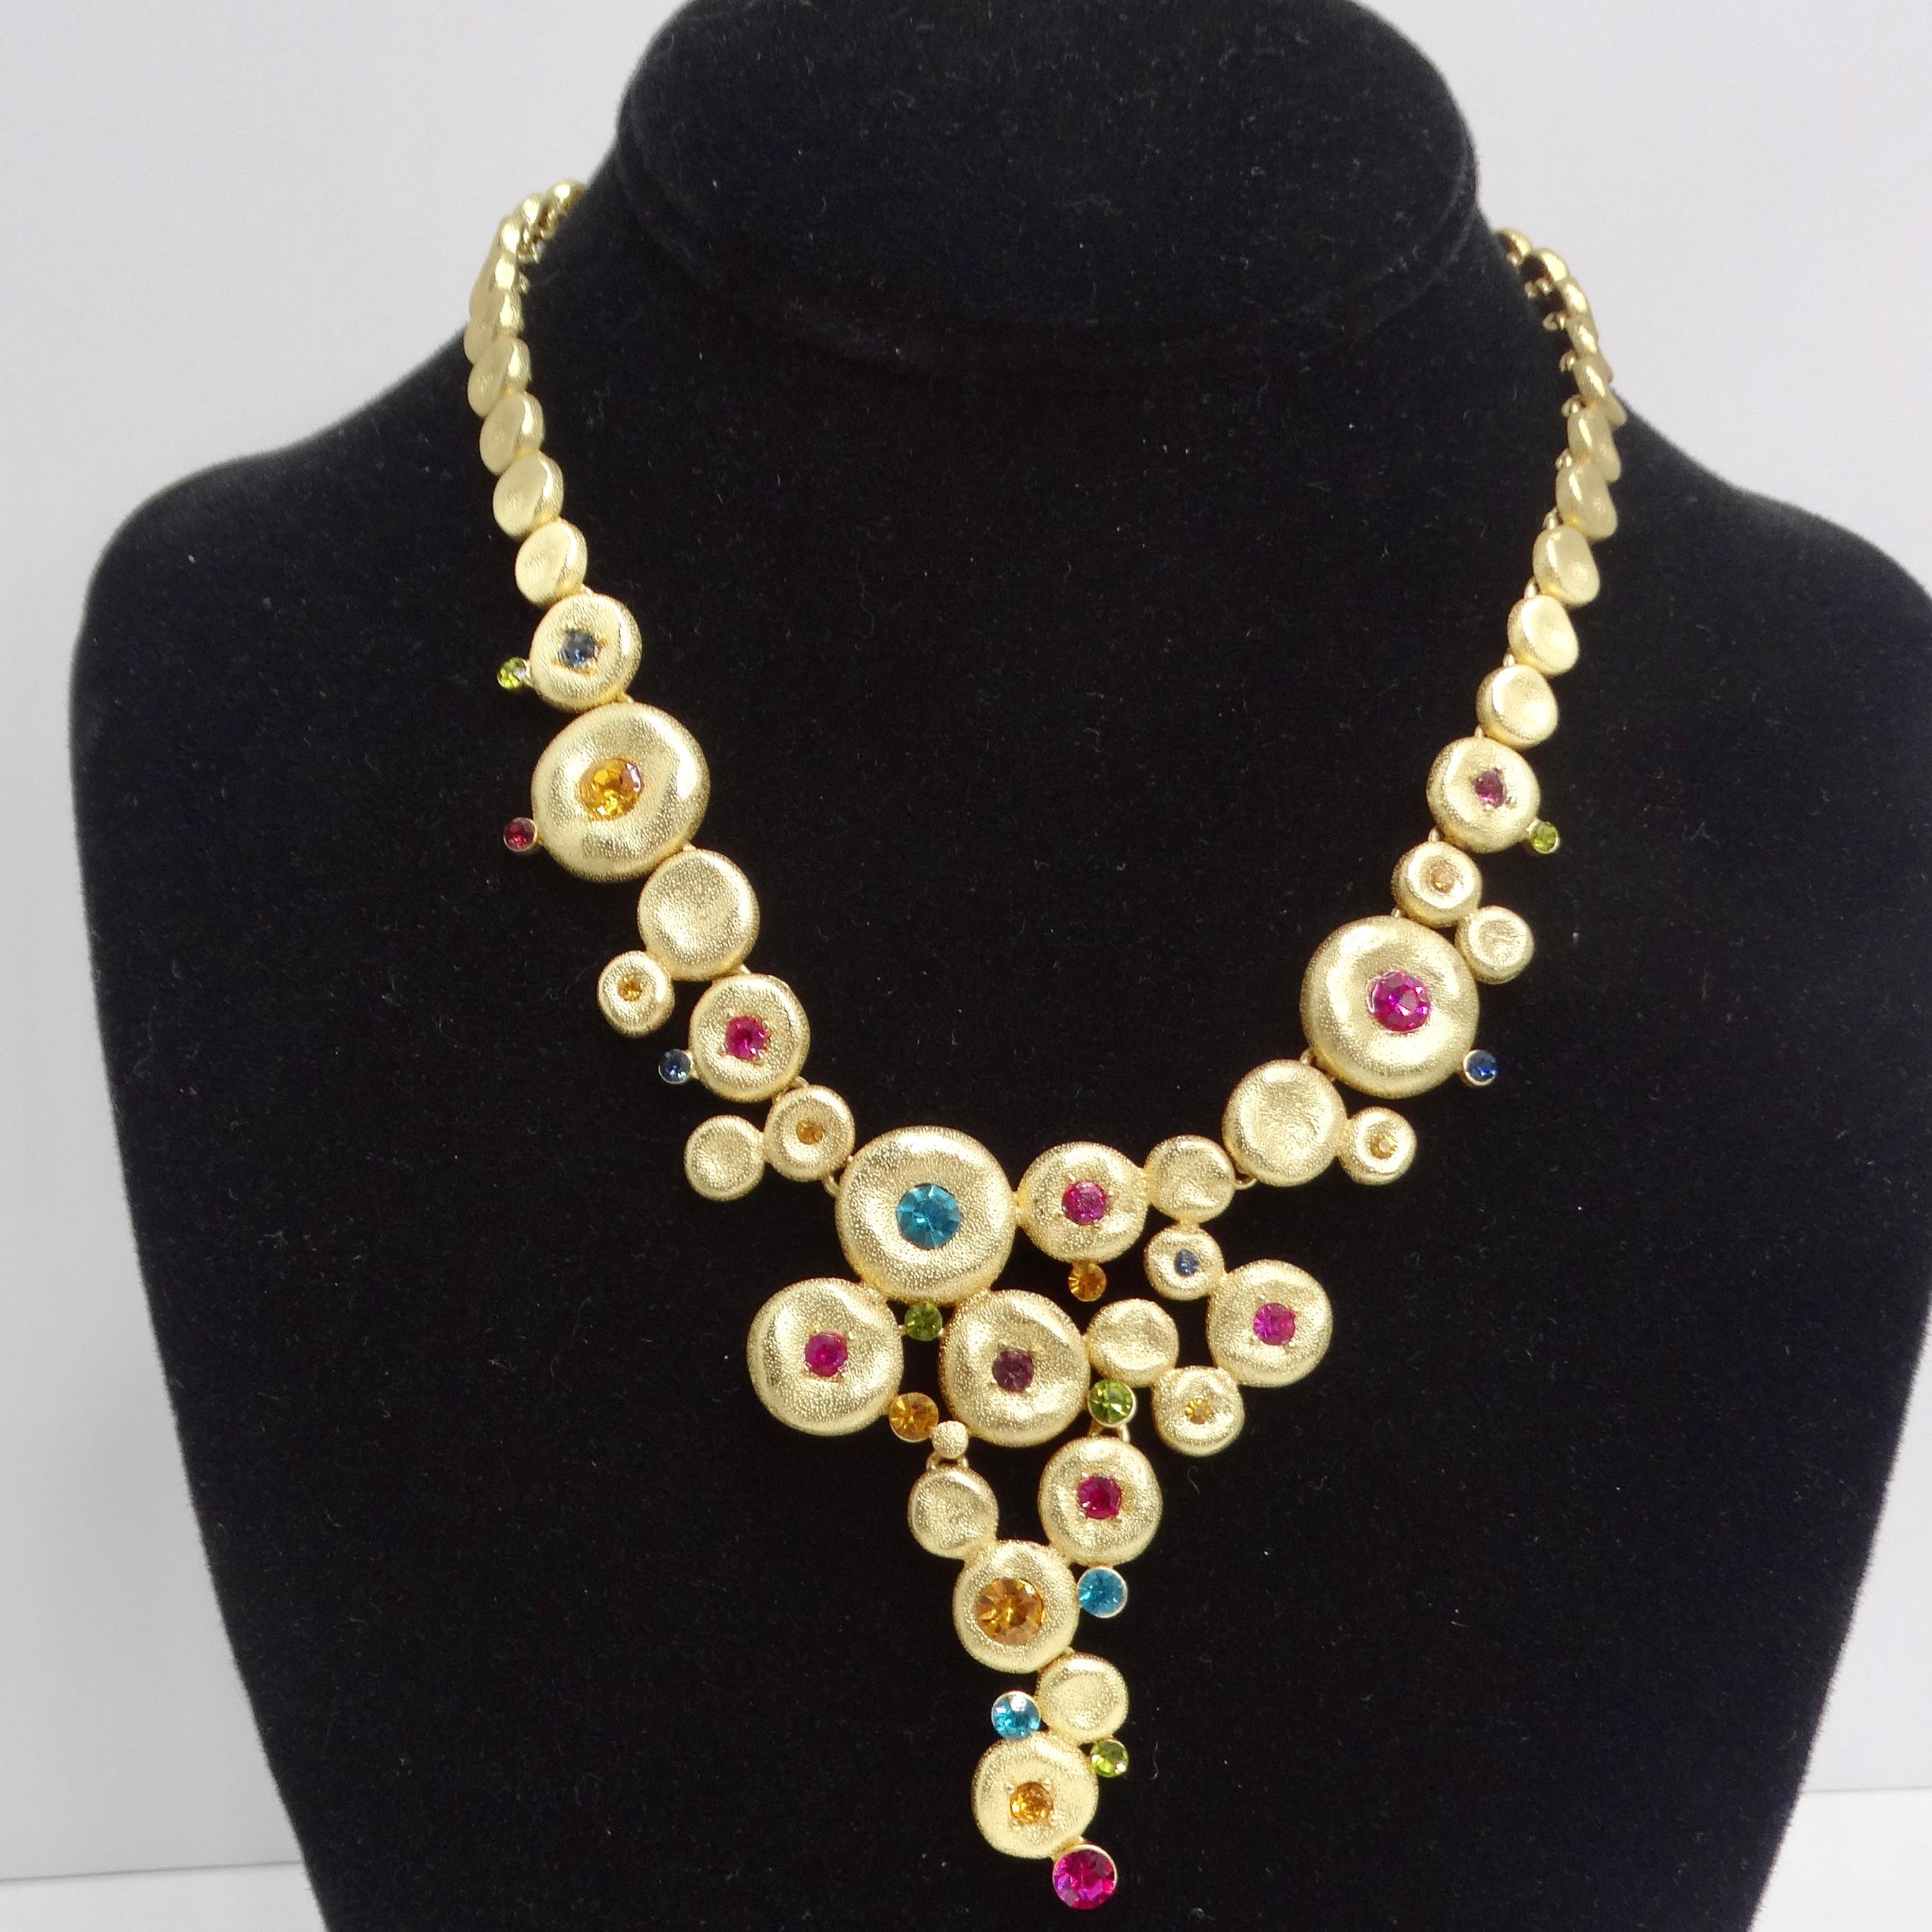 1980s Gold Tone Multicolor Rhinestone Necklace In Excellent Condition For Sale In Scottsdale, AZ